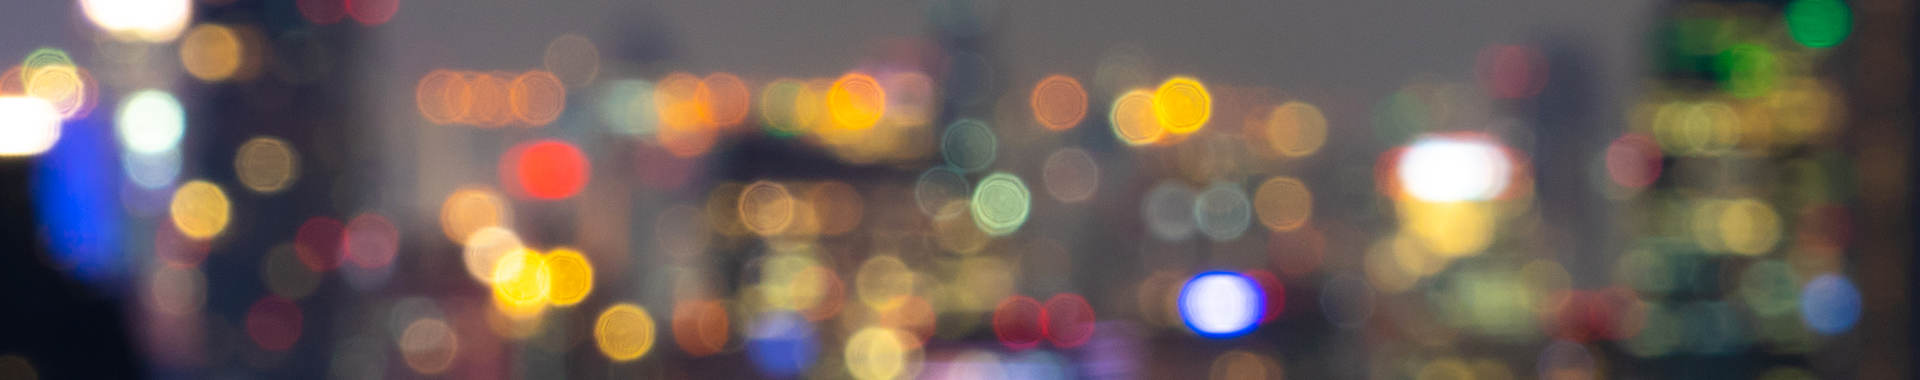 out of focus city lights